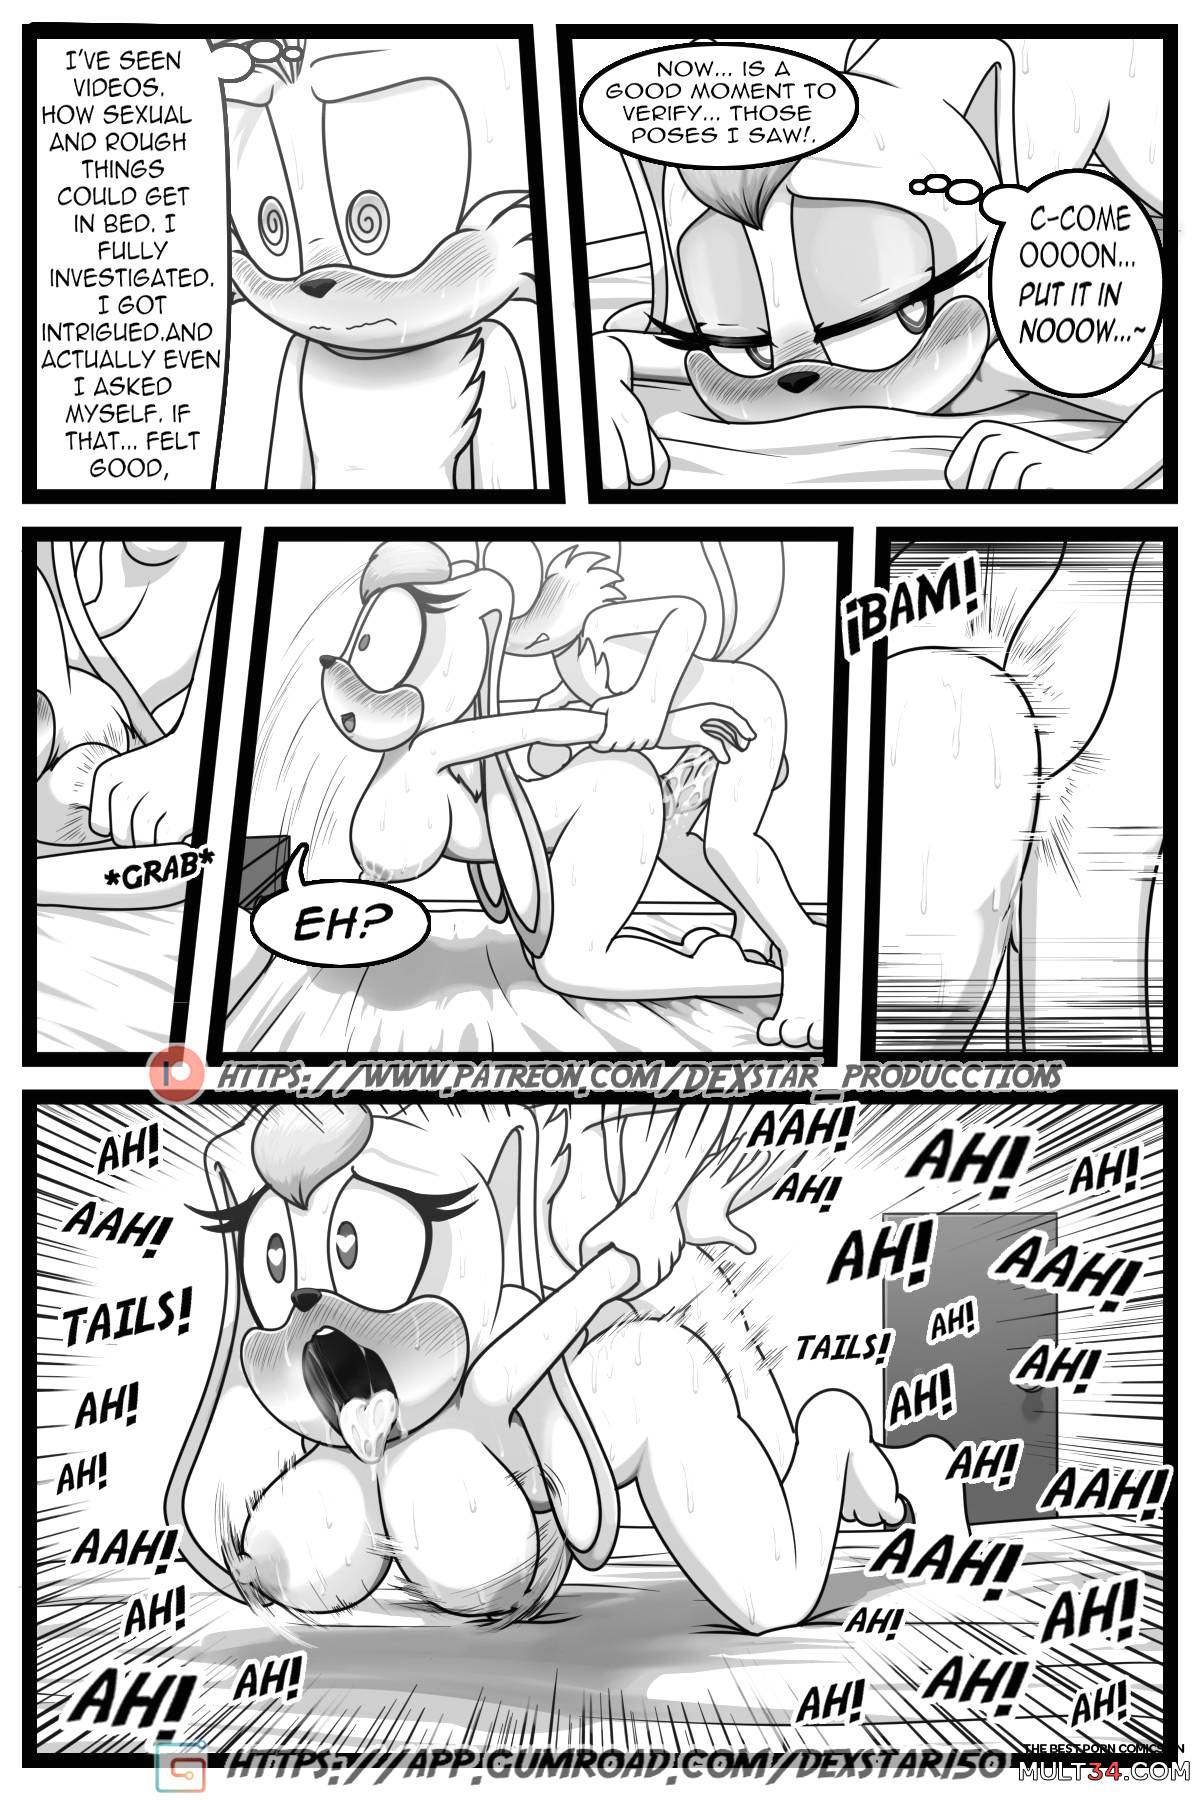 Please Fuck Me: Cream x Tail - Extra Story! page 17